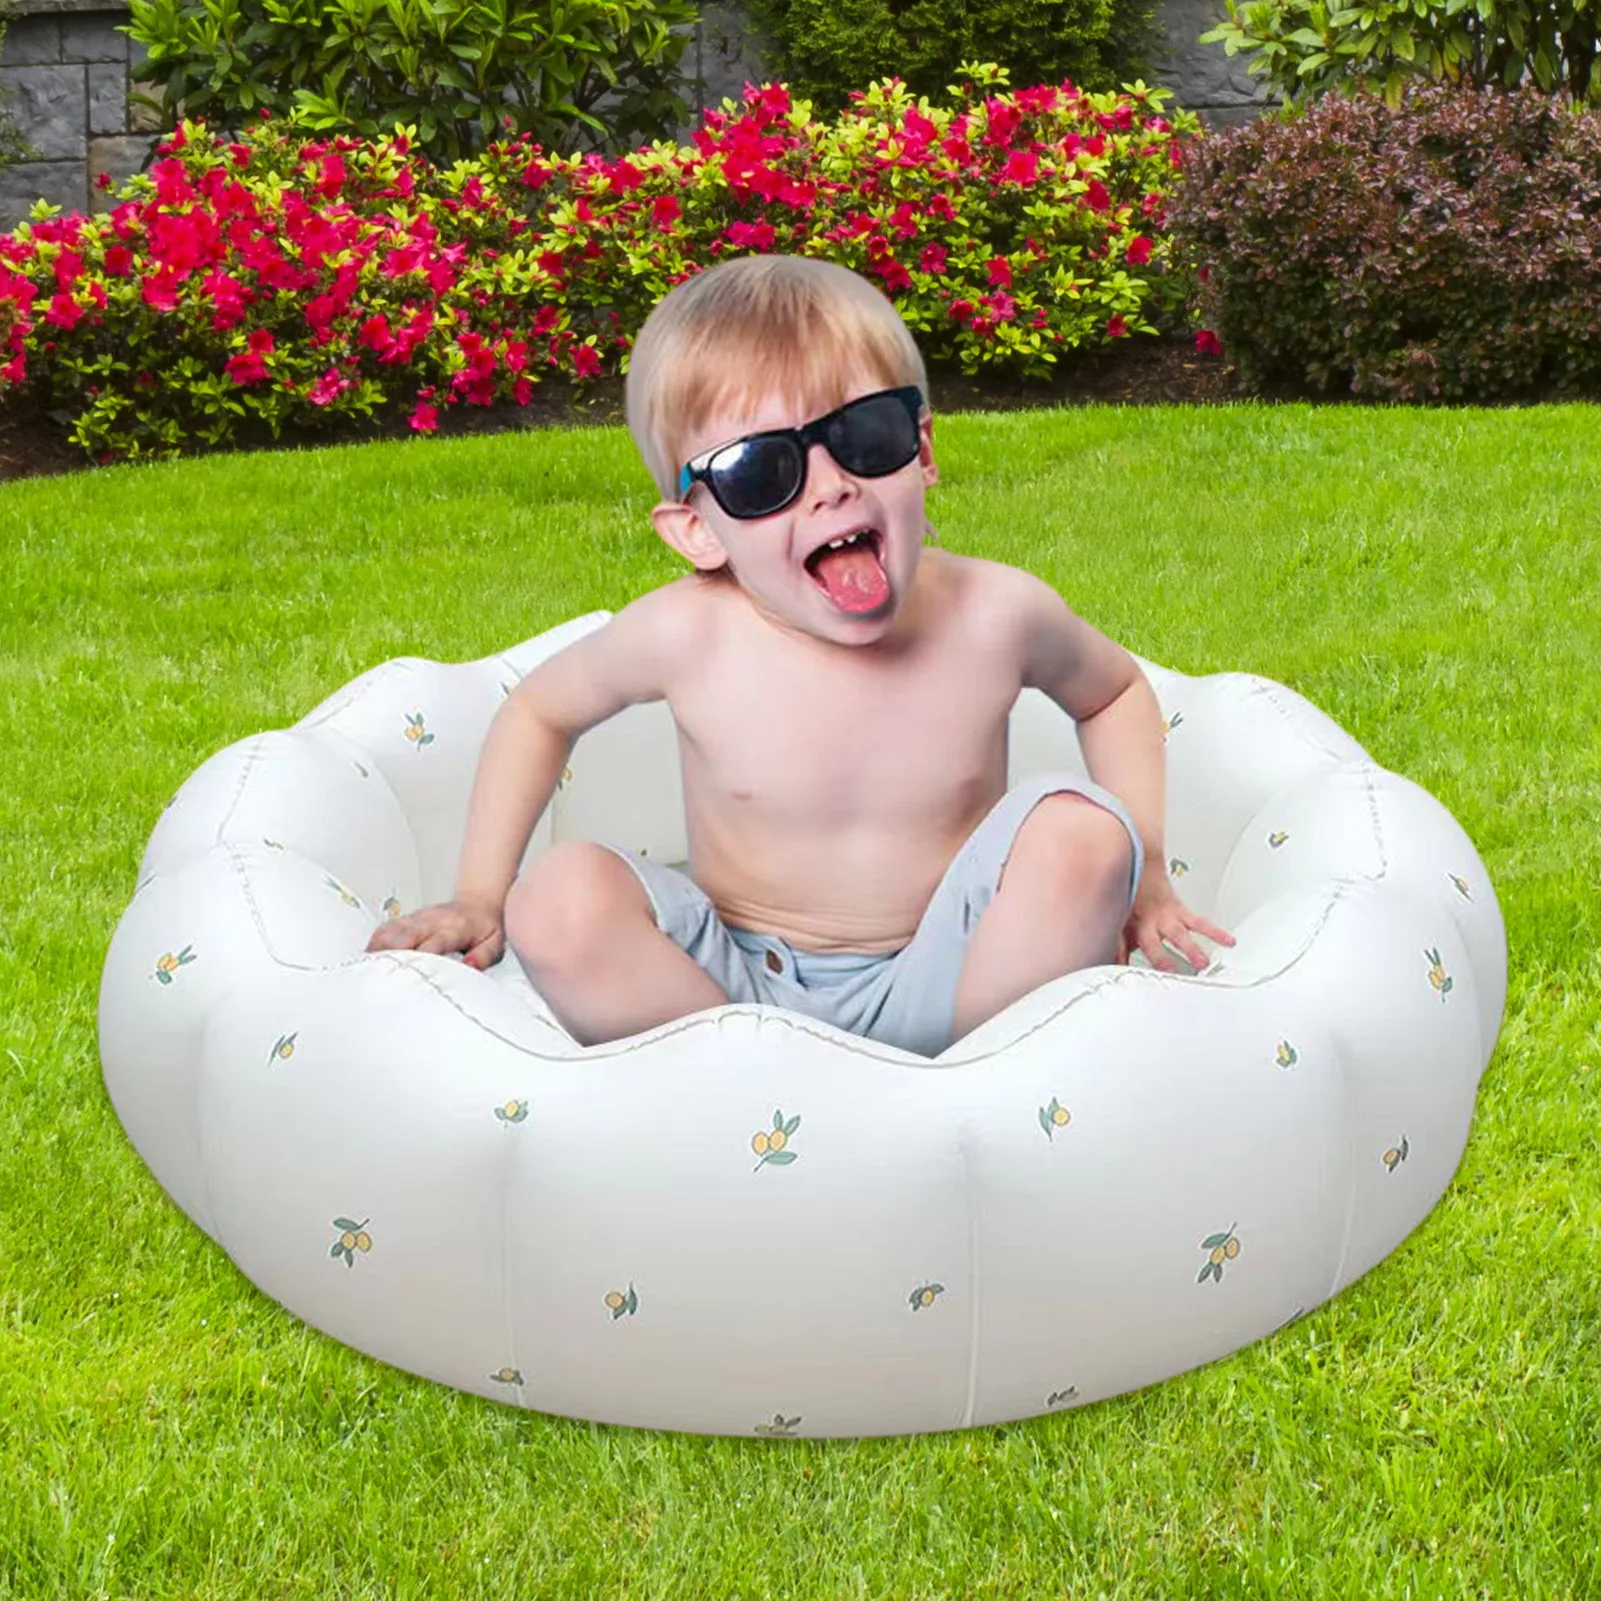 

Inflatable Swimming Pool Petal Kiddie Paddling Pool Indoor And Outdoor Portable Baby Swimming Pool Swim Center For Garden